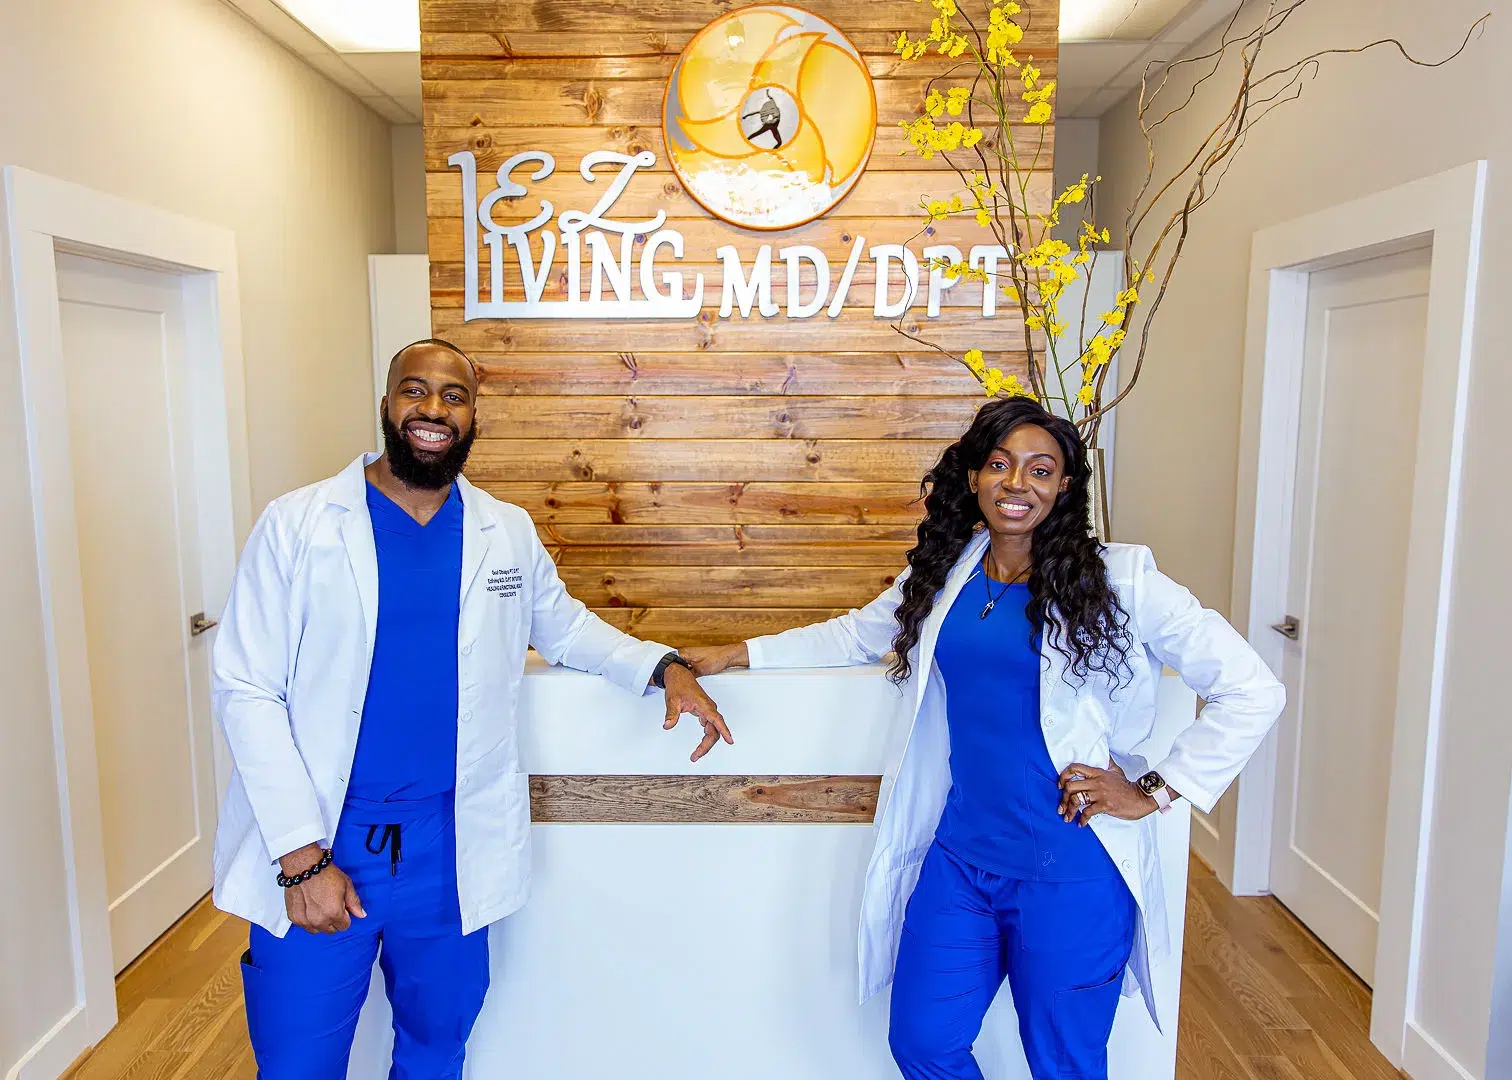 The front office of EzLiving MD DPT Intuitive Healing and Functional Health Consultants, PLLC.